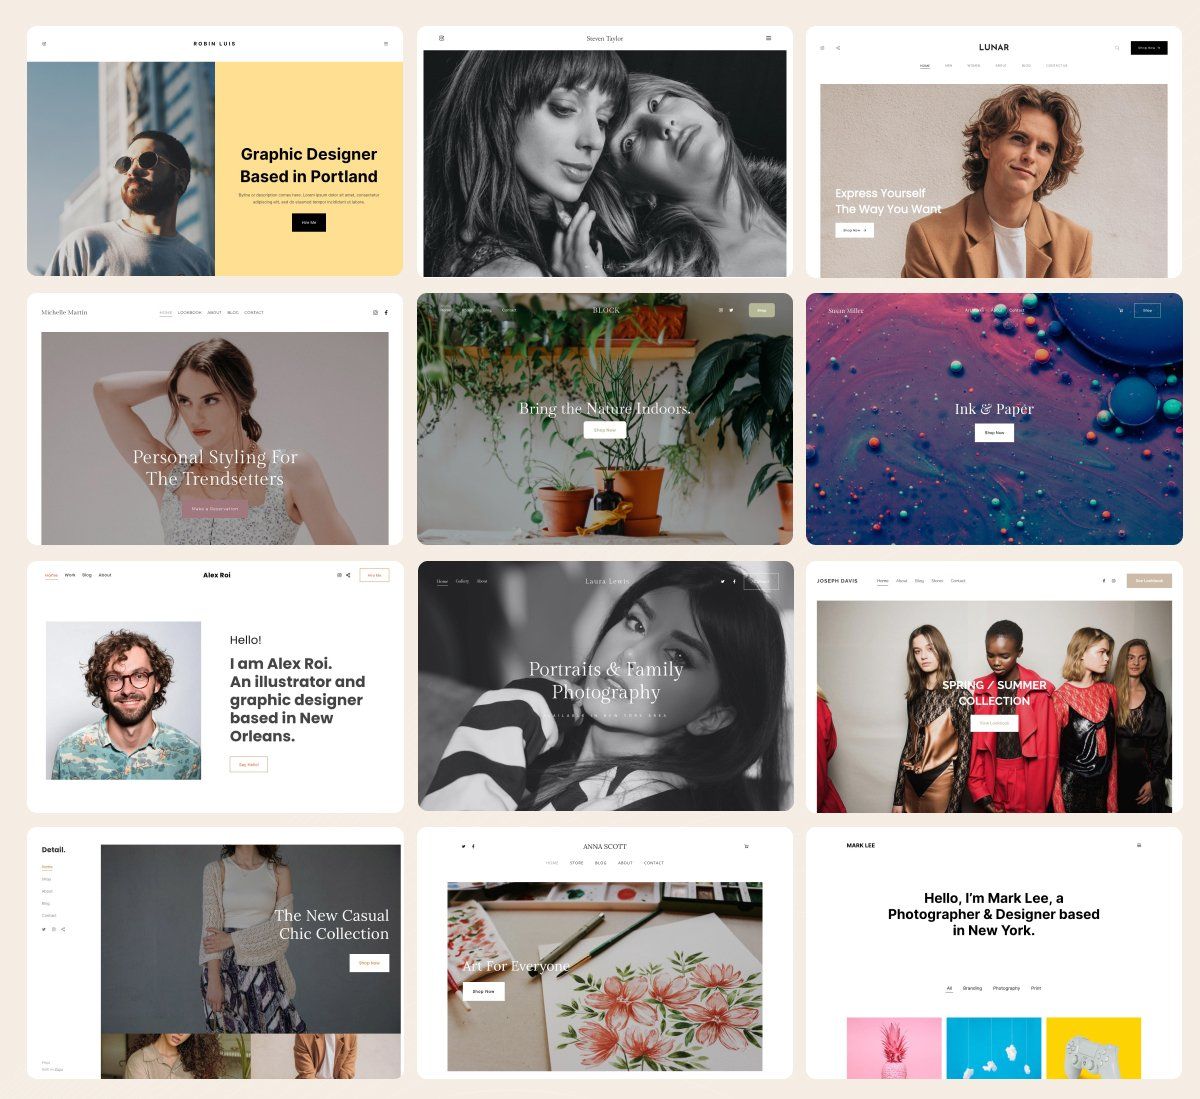 30 New Templates Launched! Handcrafted for Photographers, Designers, Artists & Creators.